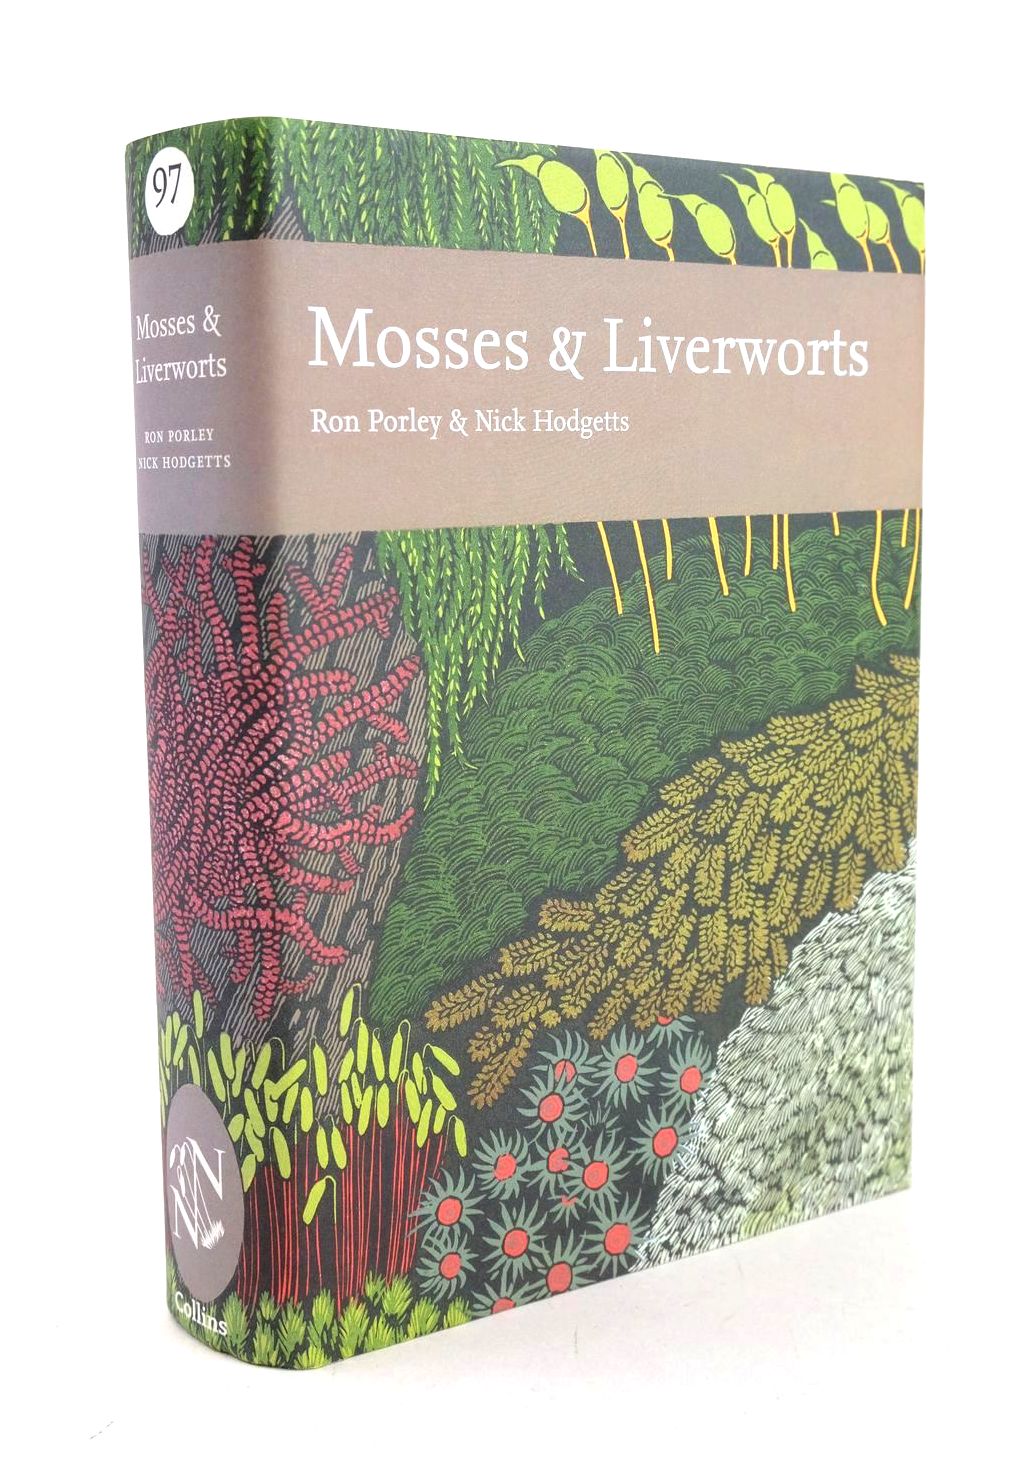 Photo of MOSSES &AMP; LIVERWORTS (NN 97) written by Porley, Ron Hodgetts, Nick published by Collins (STOCK CODE: 1326714)  for sale by Stella & Rose's Books